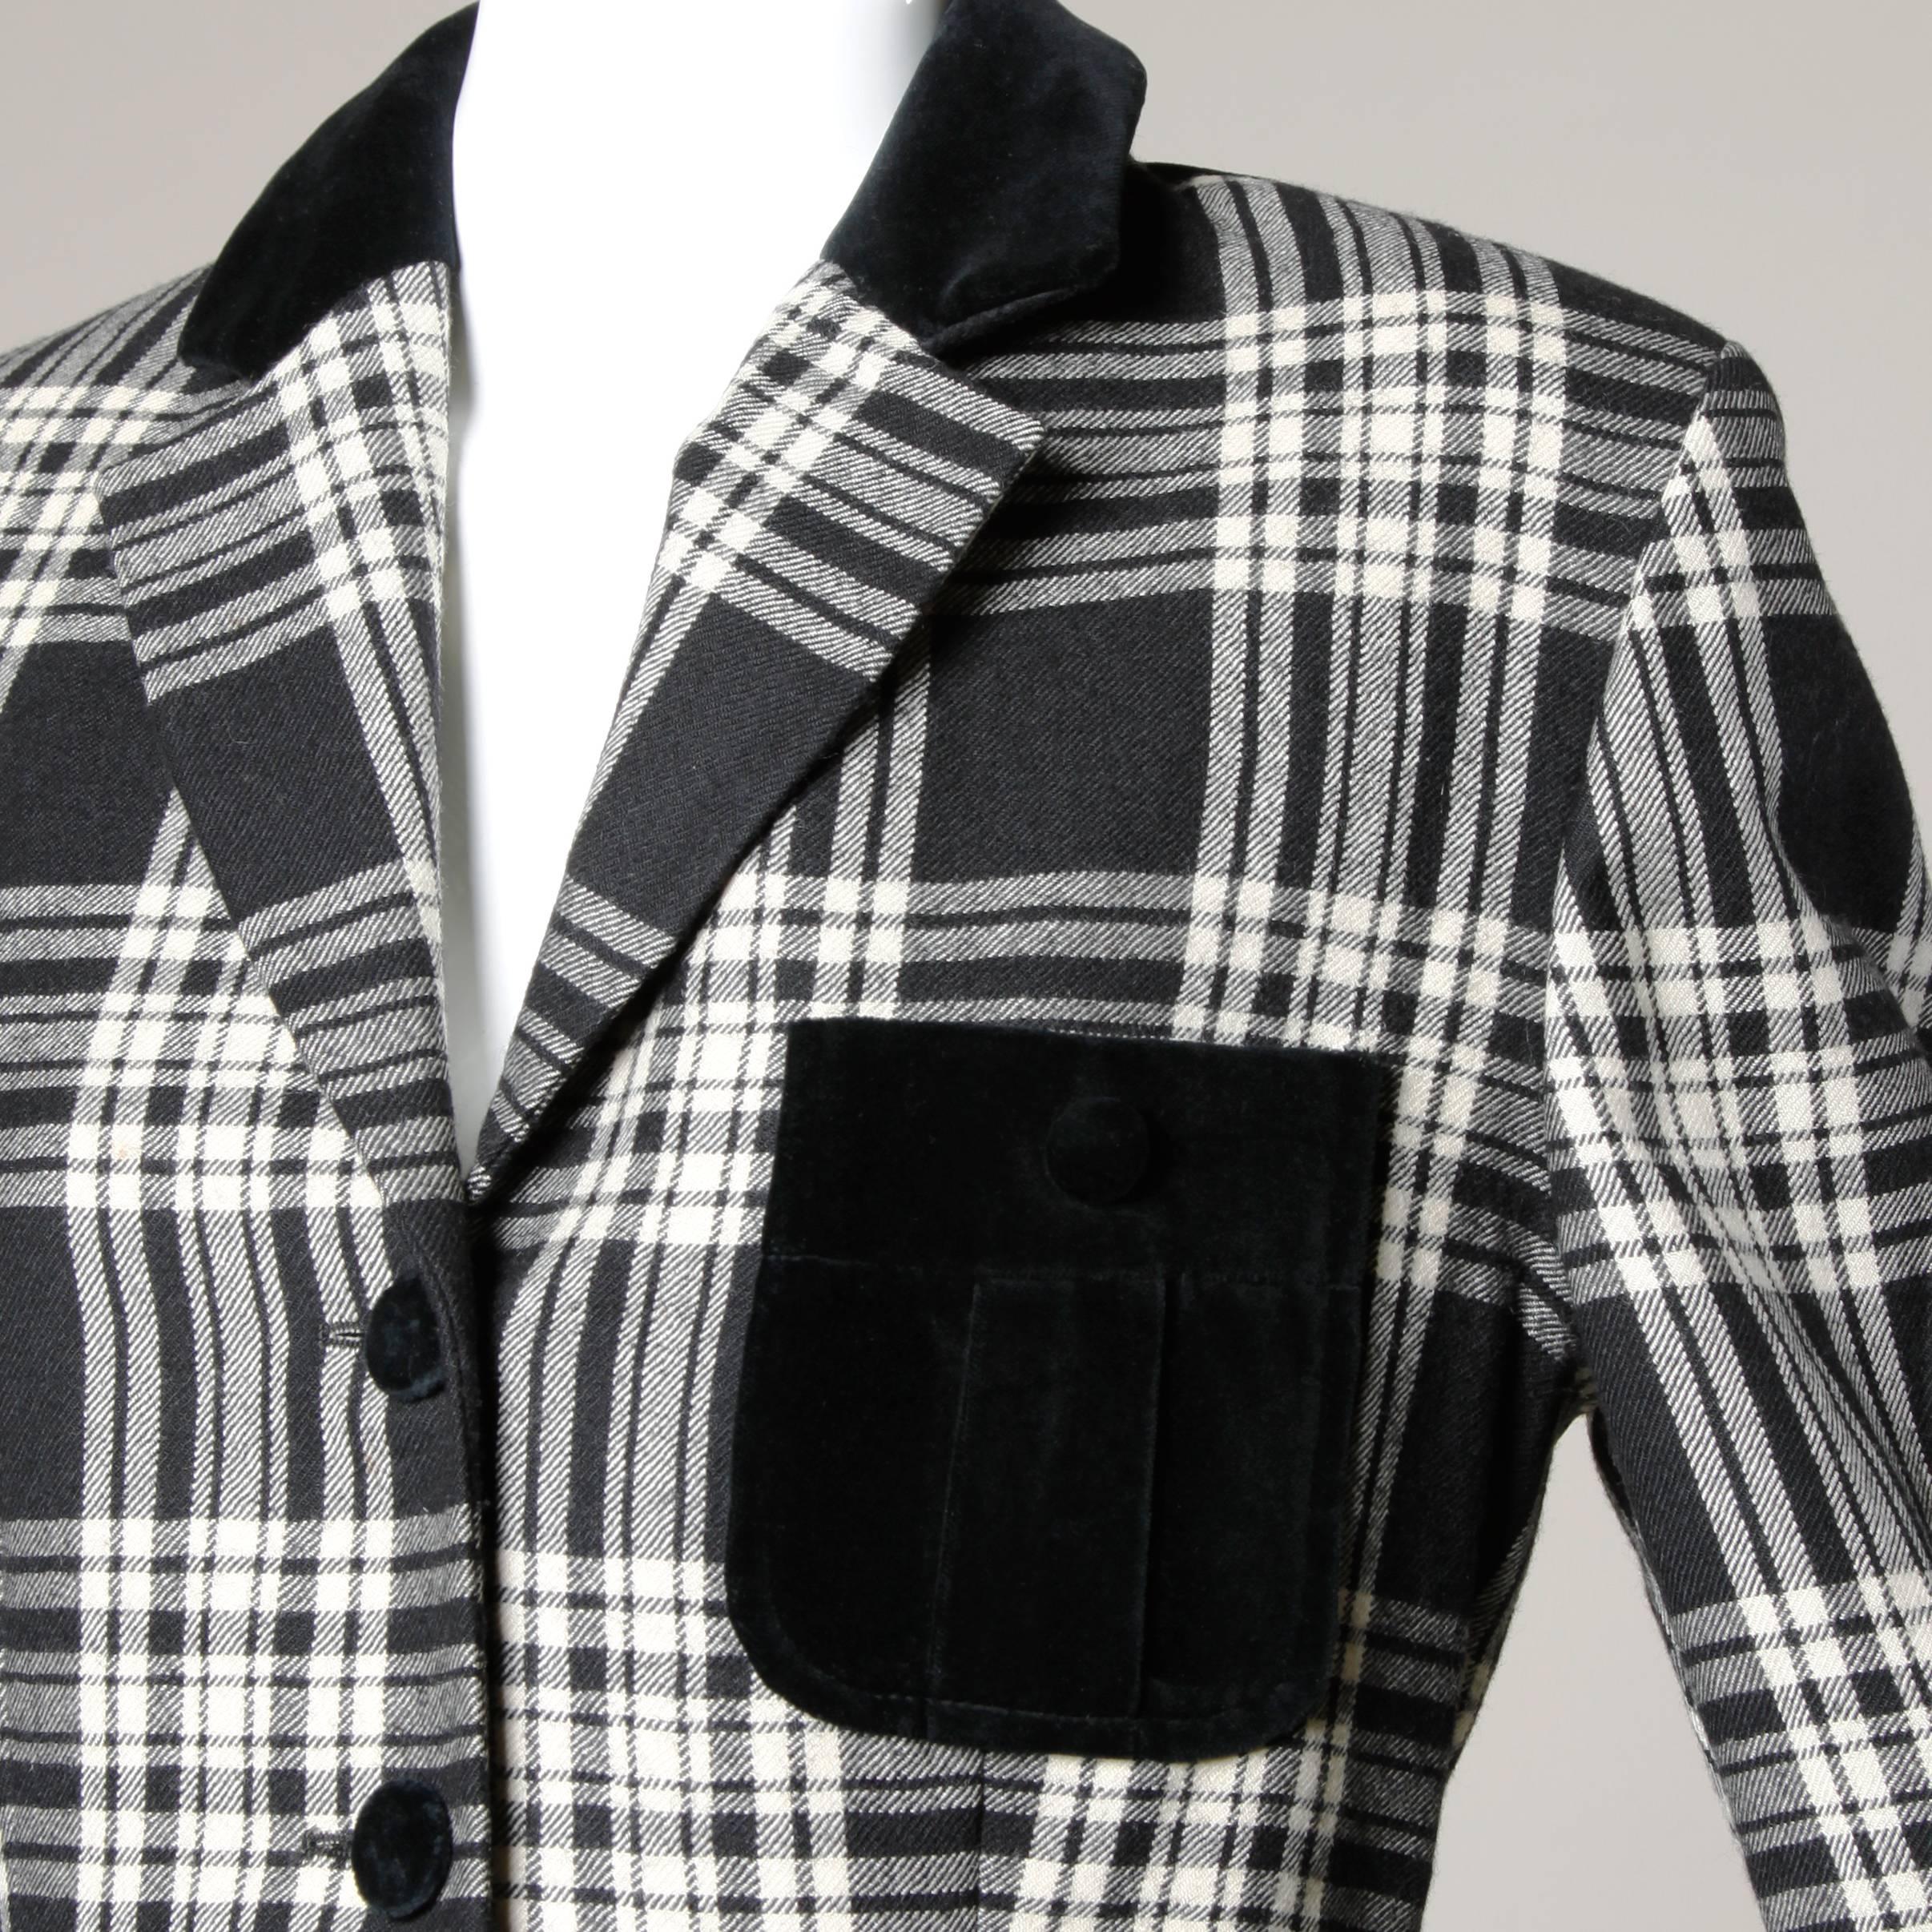 Black and white plaid blazer jacket with black pockets and red lining by GB Moschino.

Details:

Fully Lined
Front Button Closure
Marked Size: GB 12/ USA 10
Color: Black/ White 
Fabric: 100% Wool 
Label: Moschino Cheap and